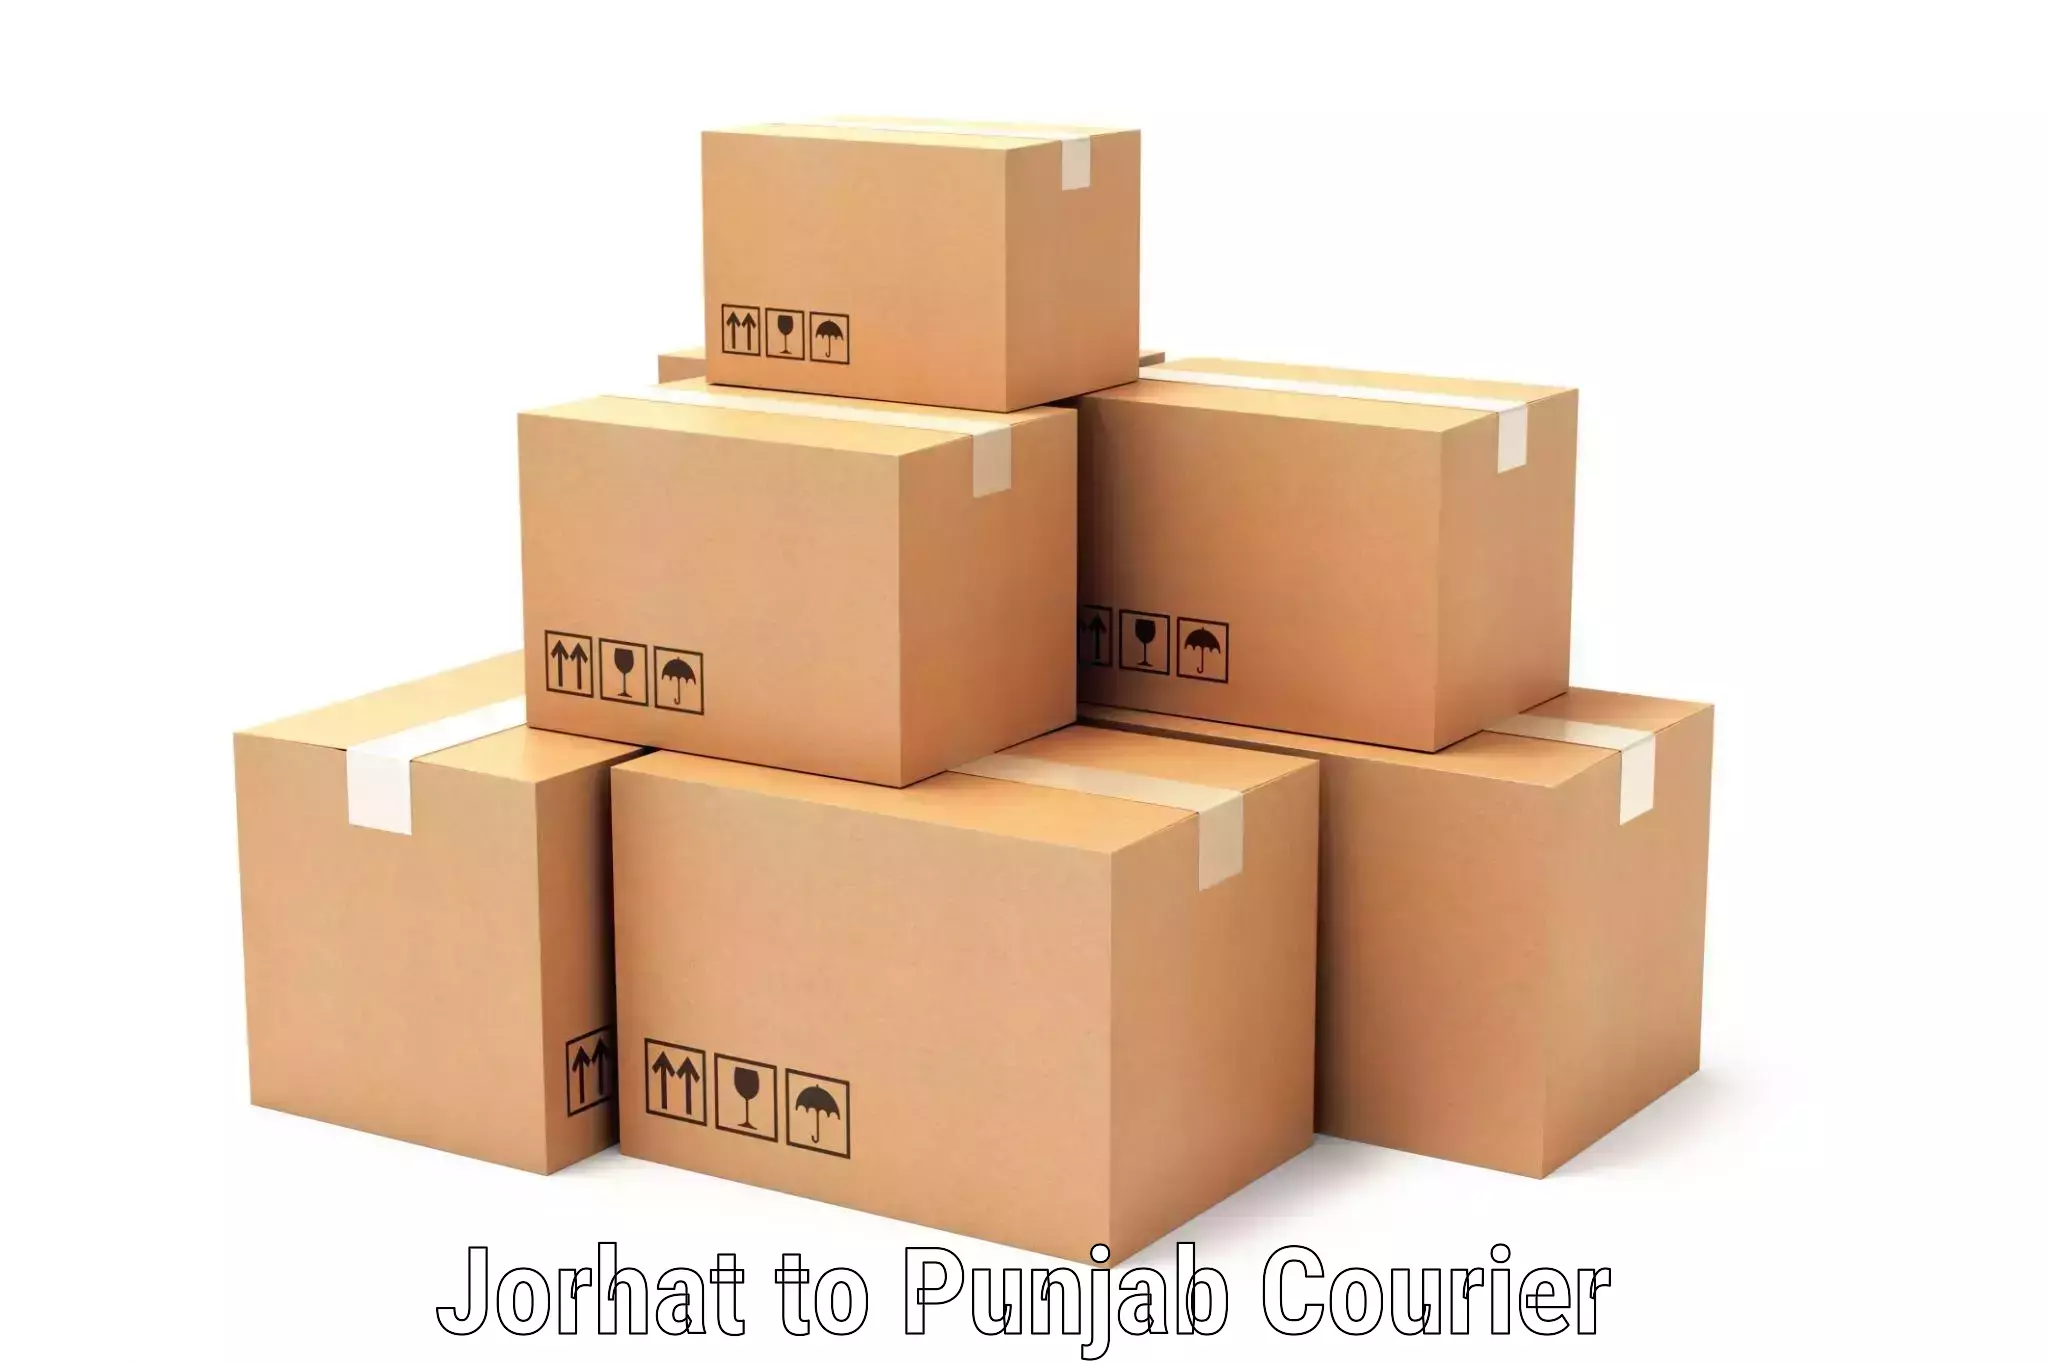 State-of-the-art courier technology Jorhat to Kapurthala